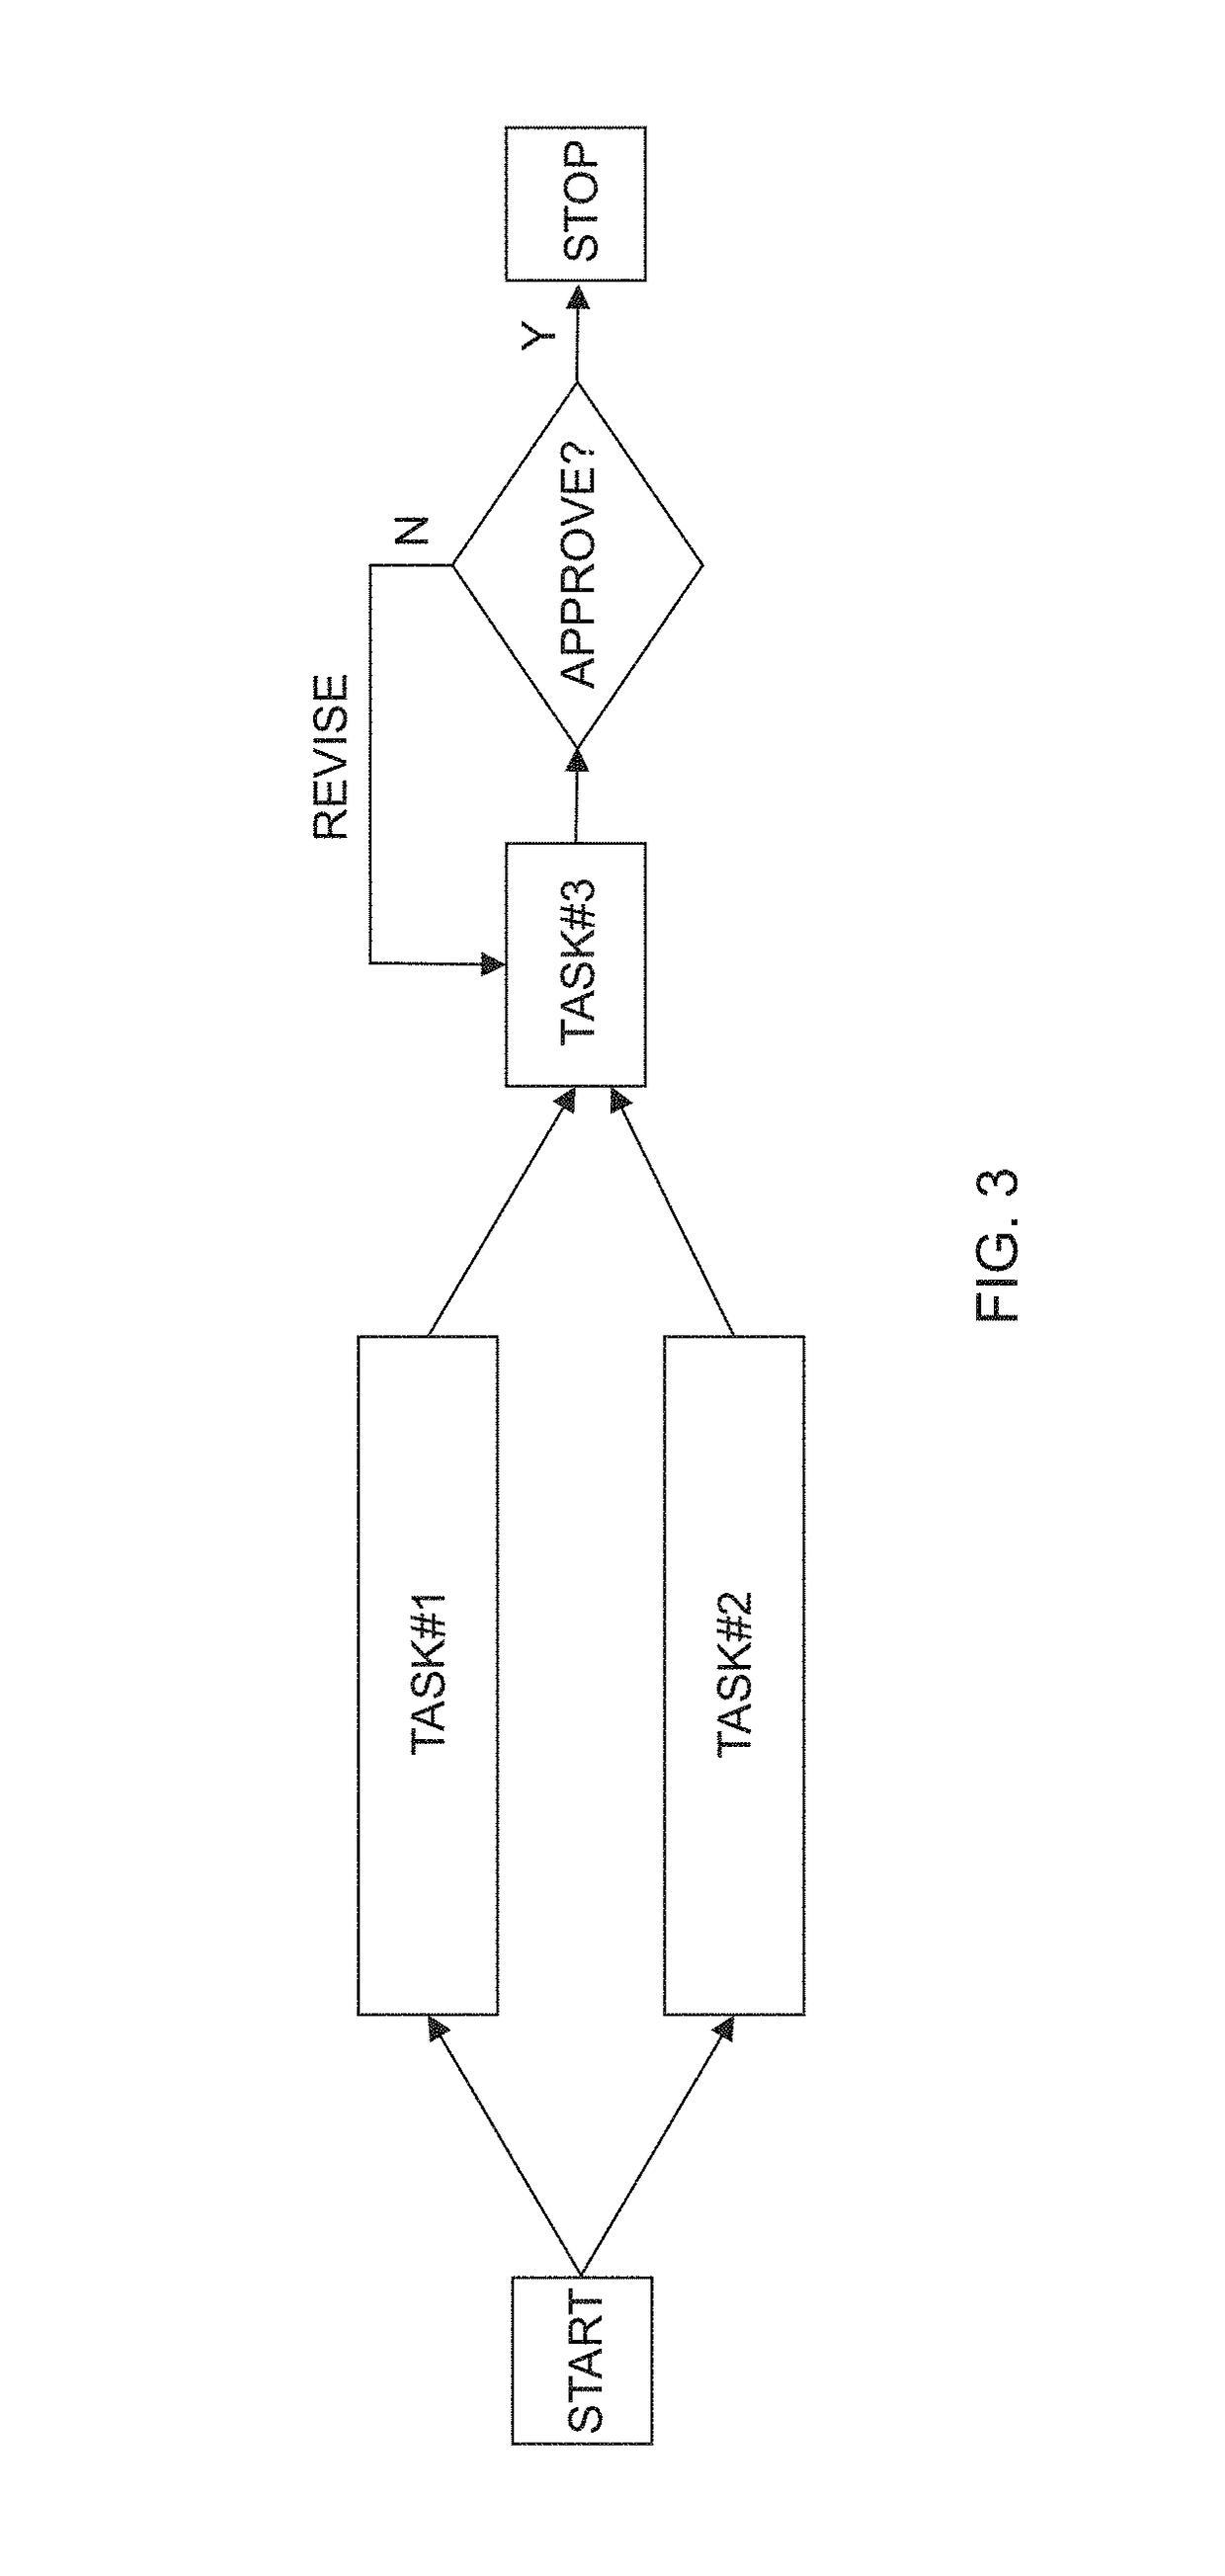 Workflow systems and methods